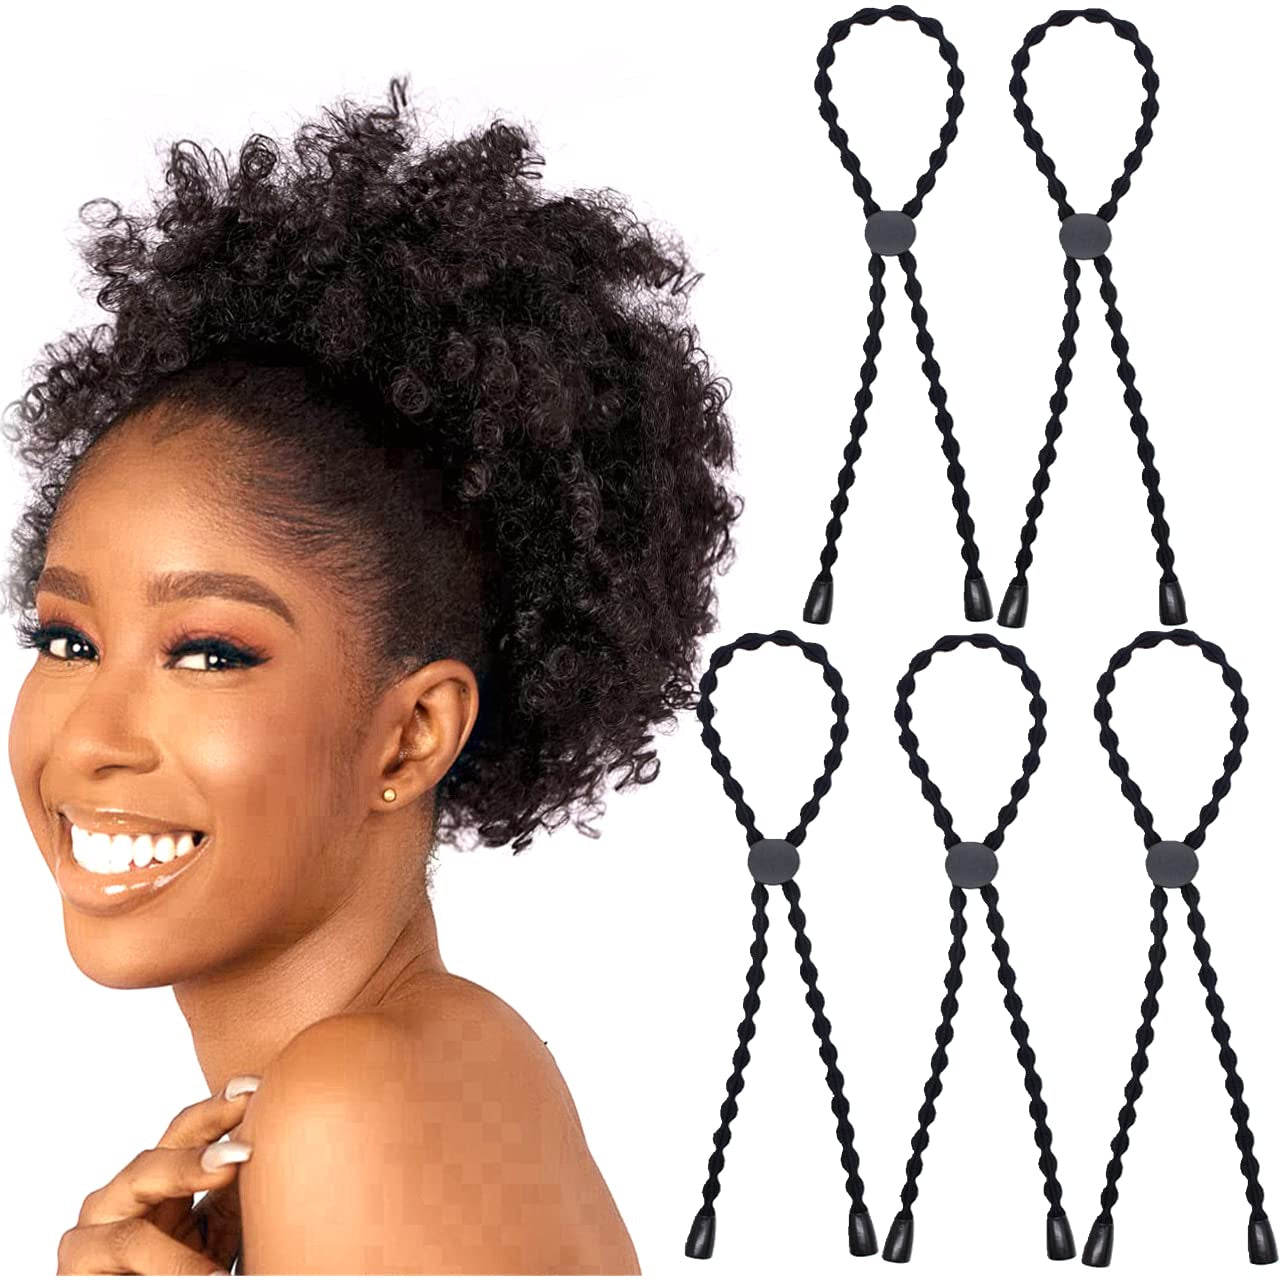 5Pcs Adjustable Hair Tie Puff Cuff Curly Hair Accessories for